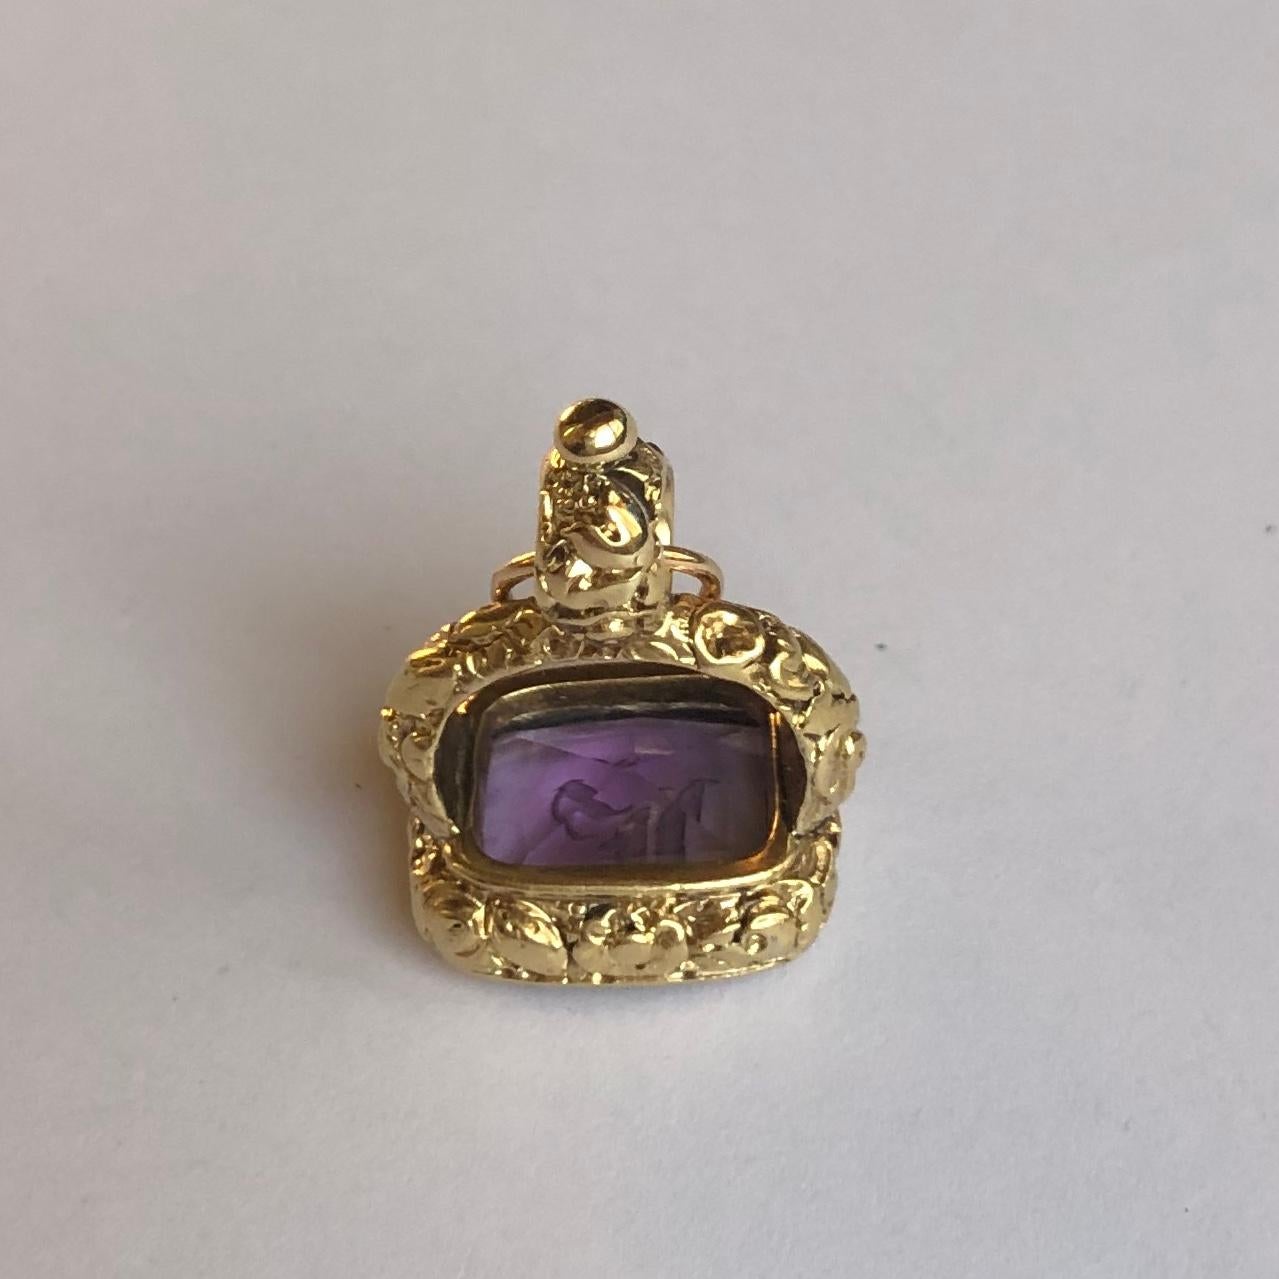 Medieval 18 Karat Yellow Gold Seal with Amethyst